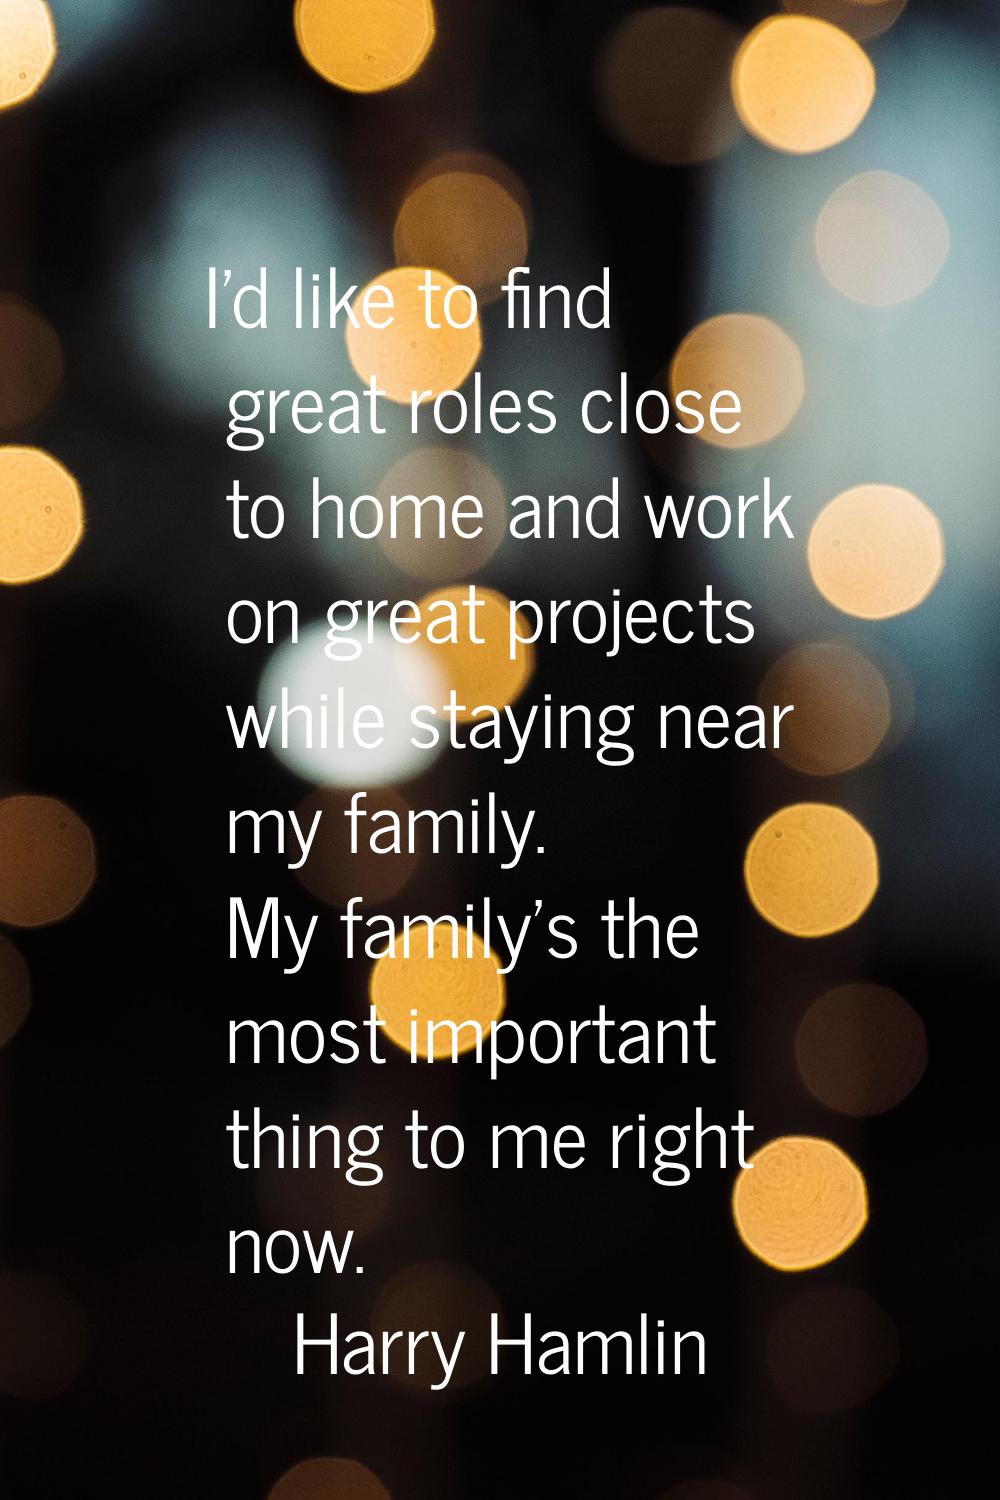 I'd like to find great roles close to home and work on great projects while staying near my family.